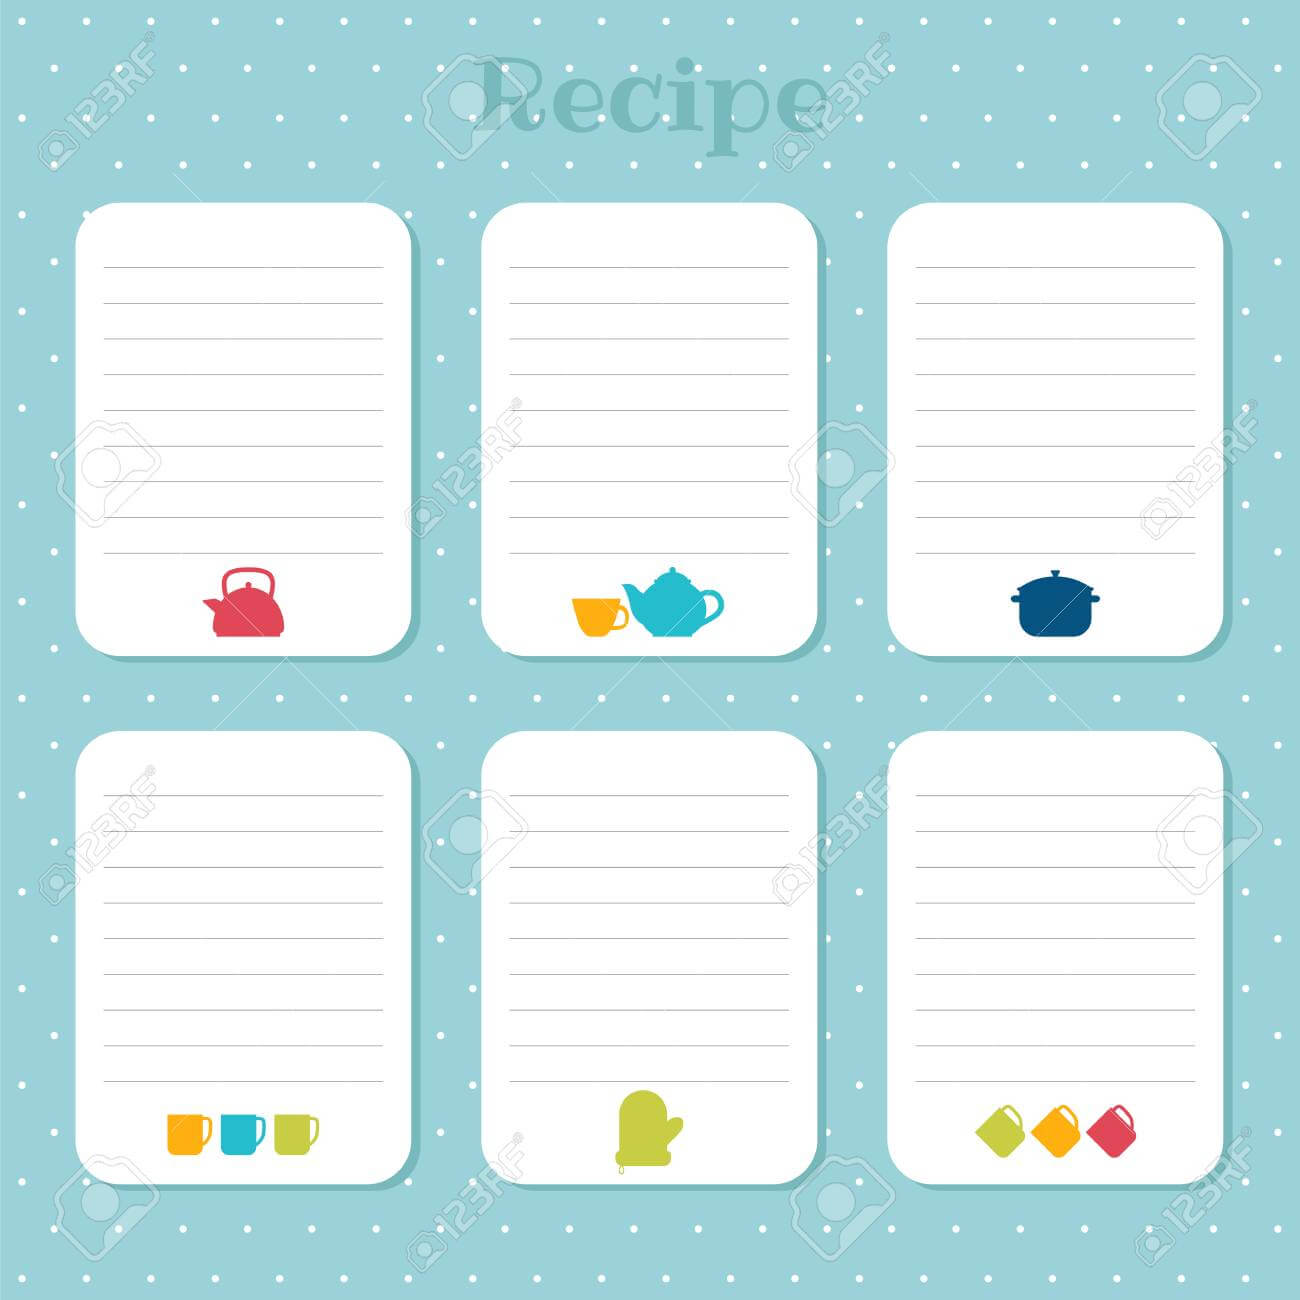 Recipe Cards Set. Cooking Card Templates. For Restaurant, Cafe,.. In Restaurant Recipe Card Template